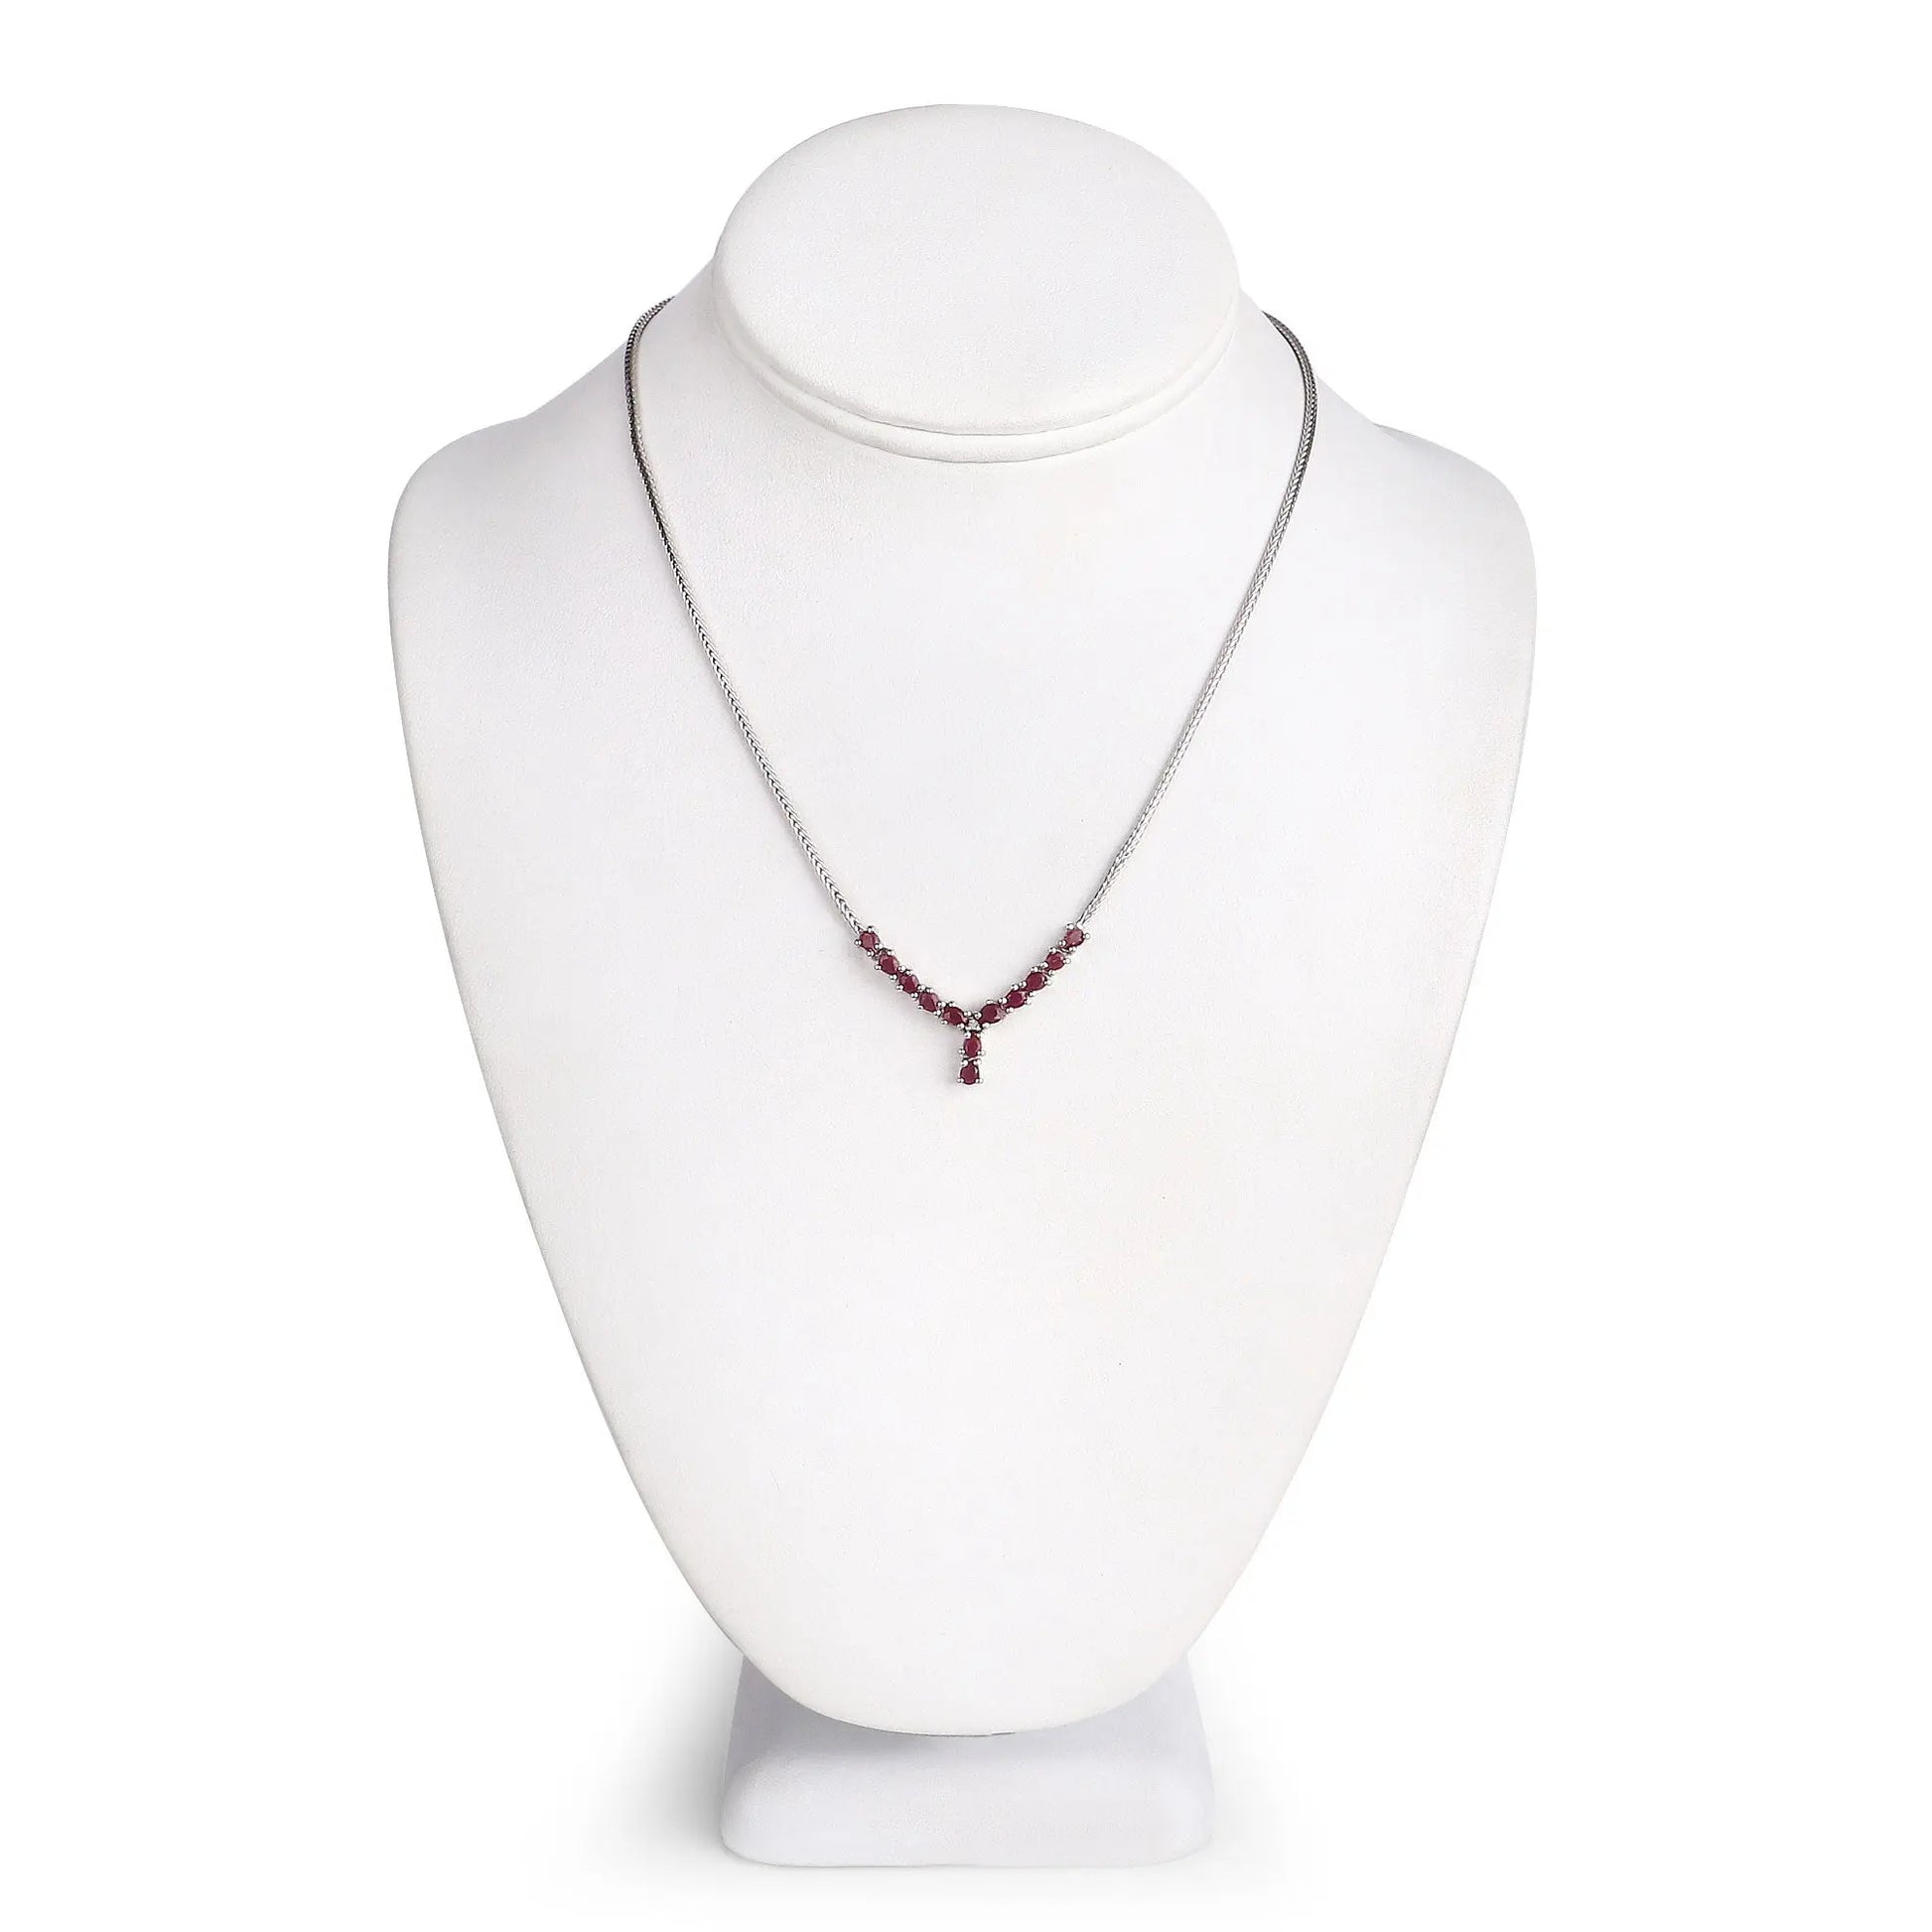 2.41 Carat Genuine Ruby and White Diamond .925 Sterling Silver Necklace - GOLDISSEYA